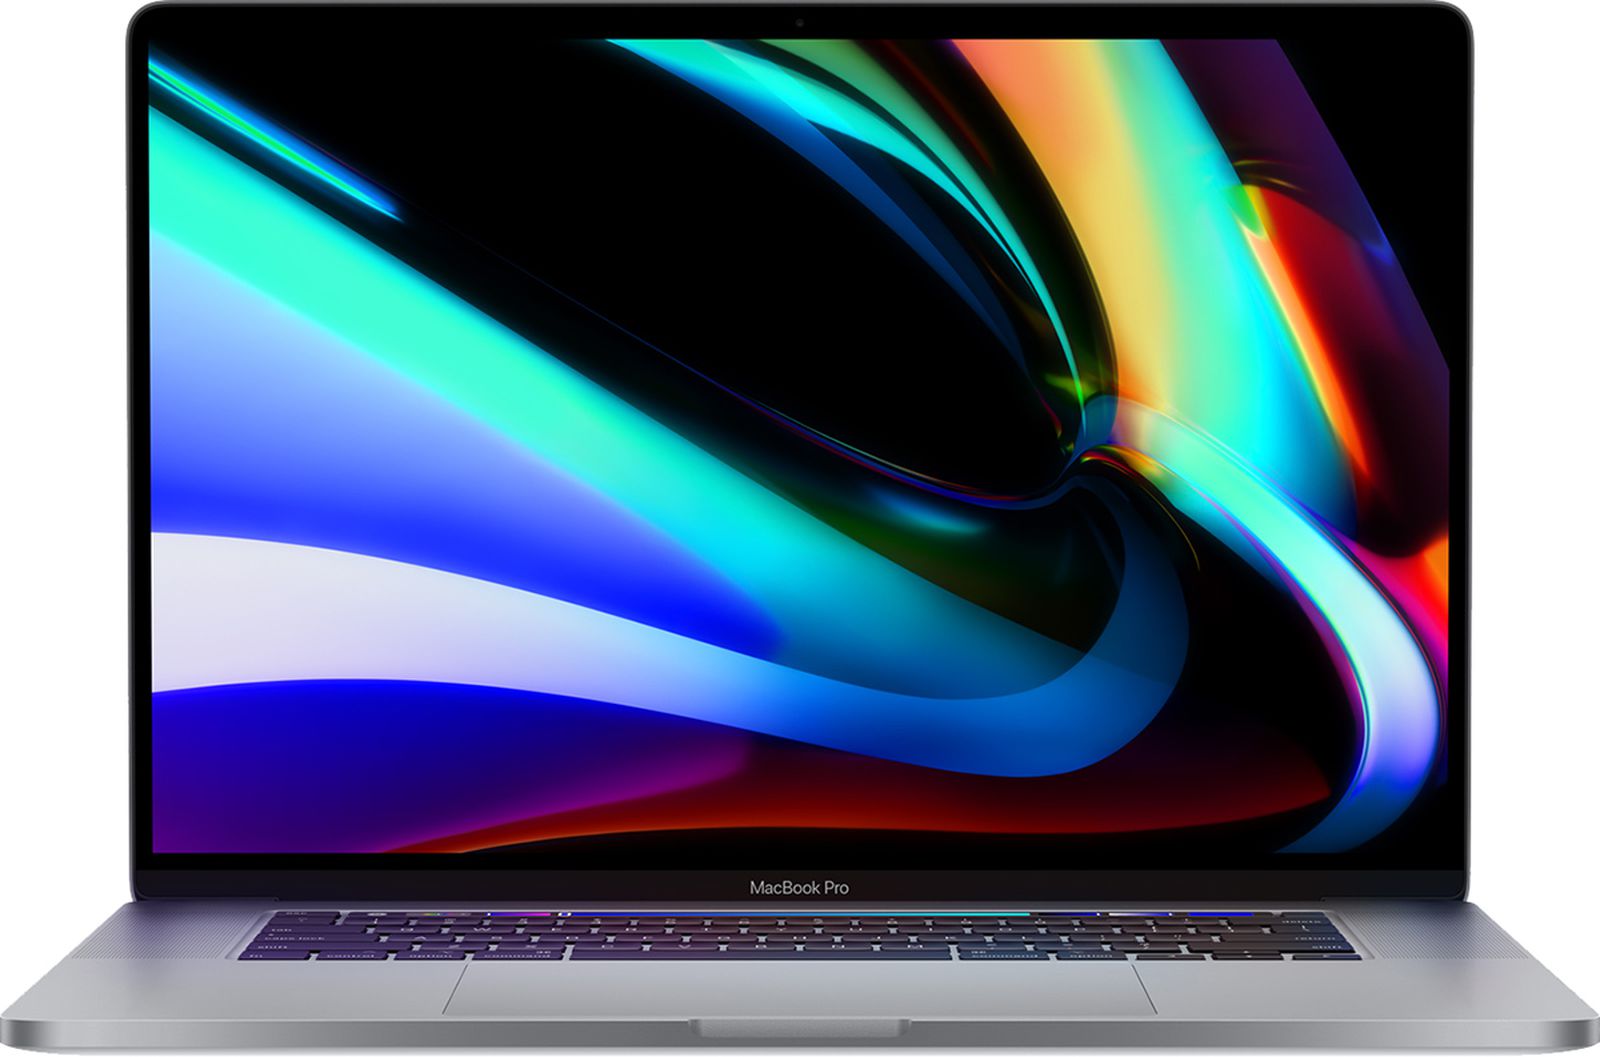 Kuo: new MacBook Pro models to include a flat-edge design, MagSafe, no touch bars and more ports